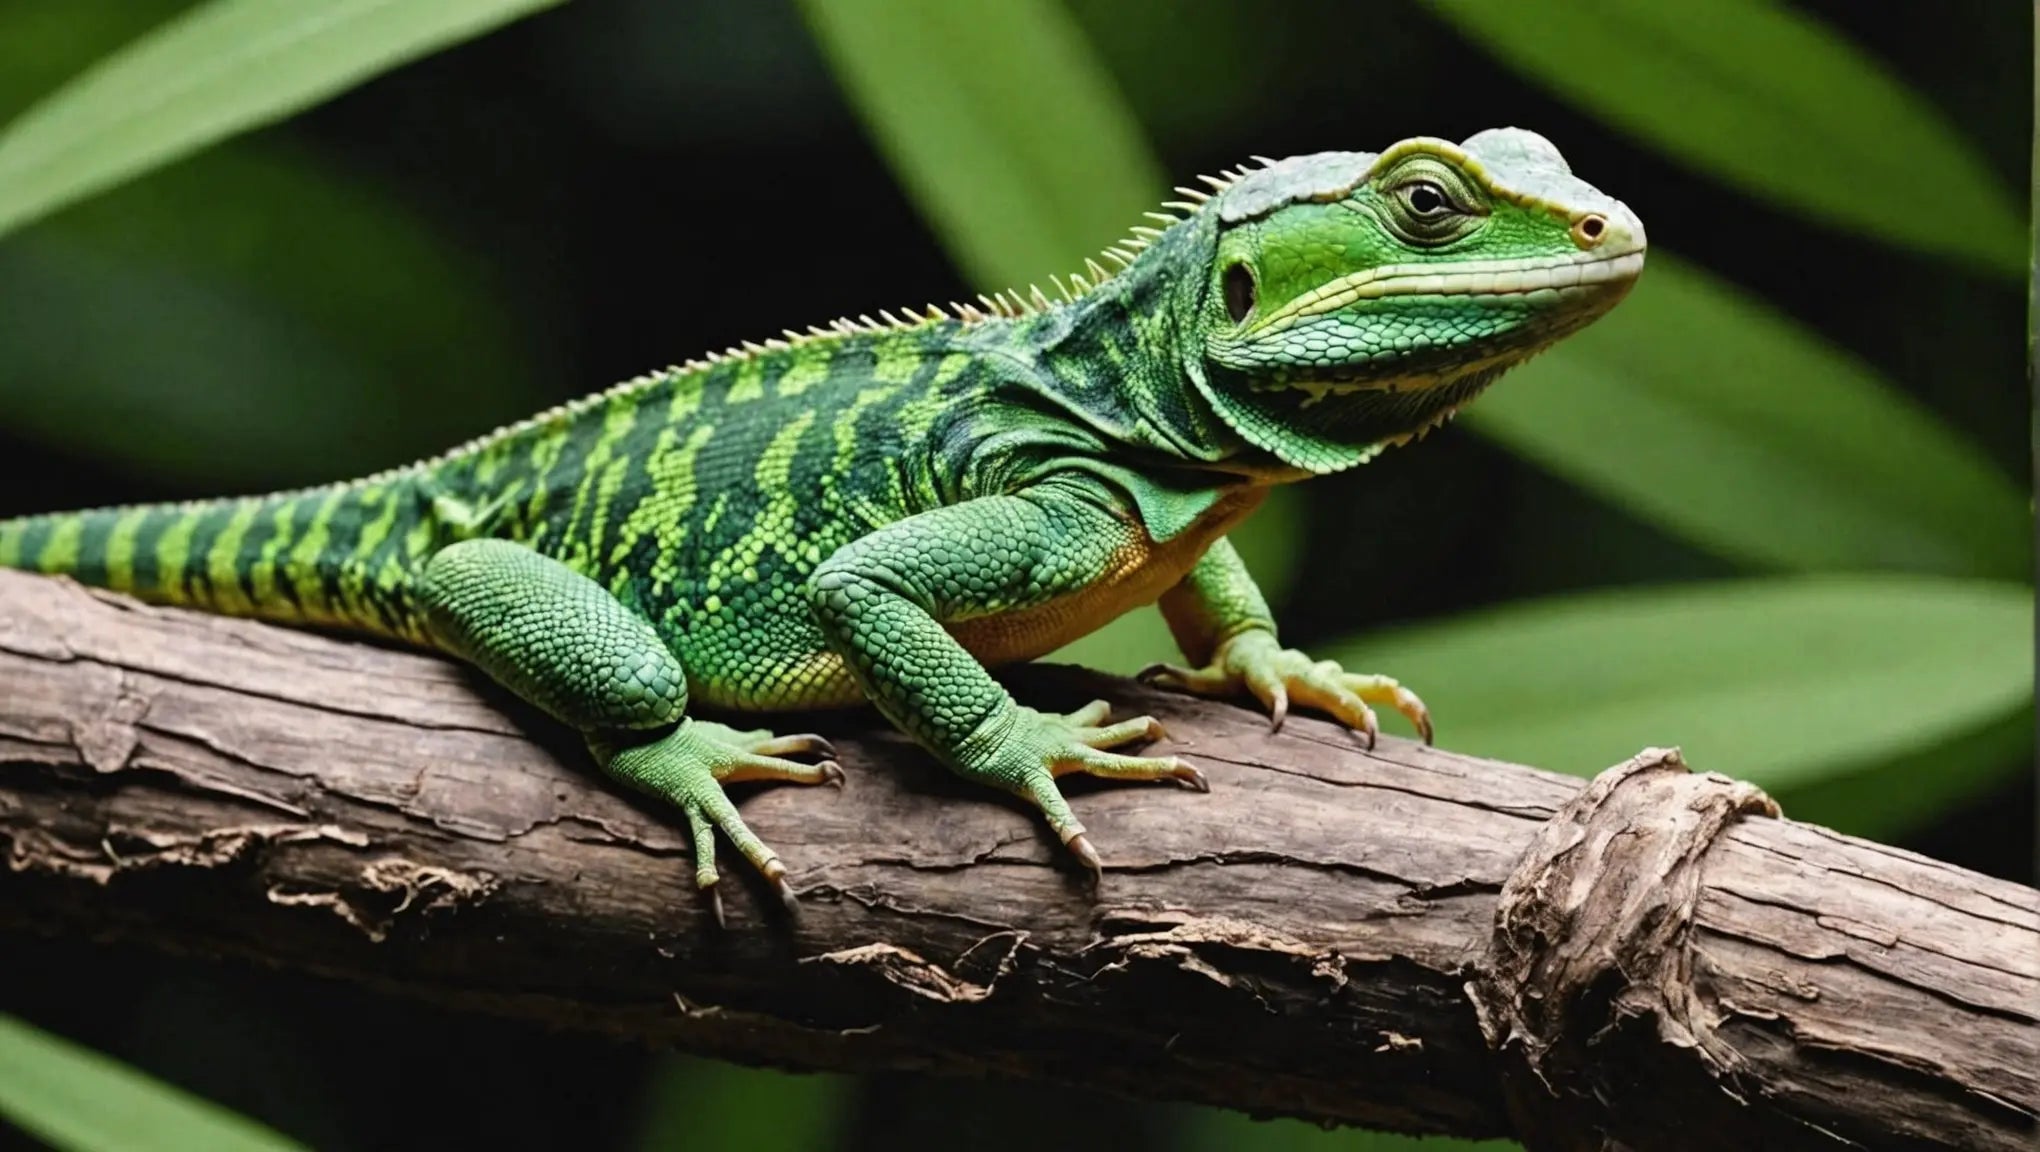 Provide the Best Care for Your Reptiles with Reptile Care Products